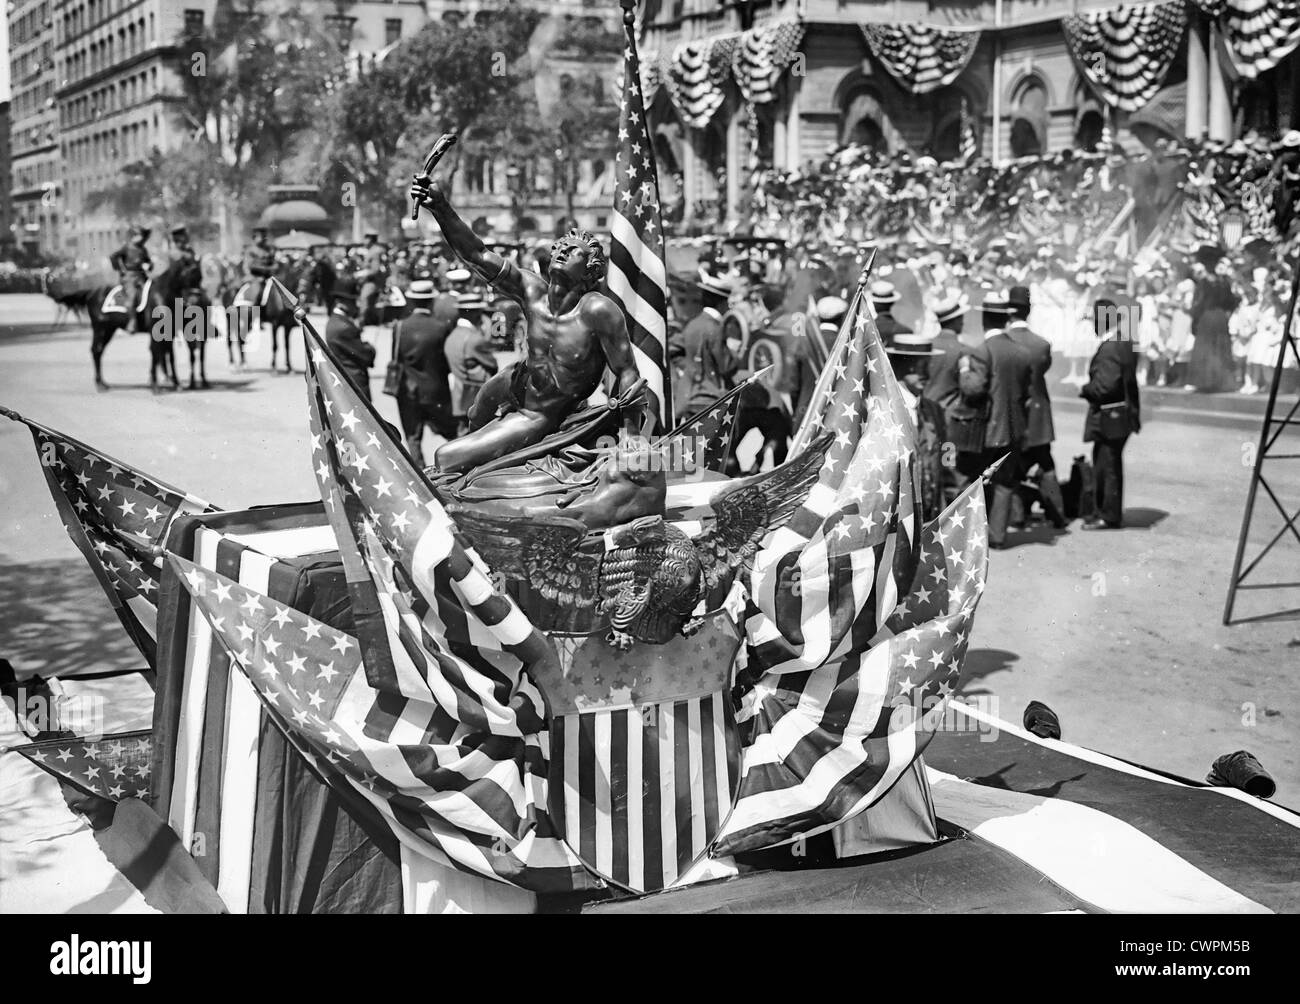 Olympic Athlete's Reception, Marathon trophy, New York, Photo showing an event in New York City related to the 4th Olympic Games, held in London, England, in 1908. Stock Photo